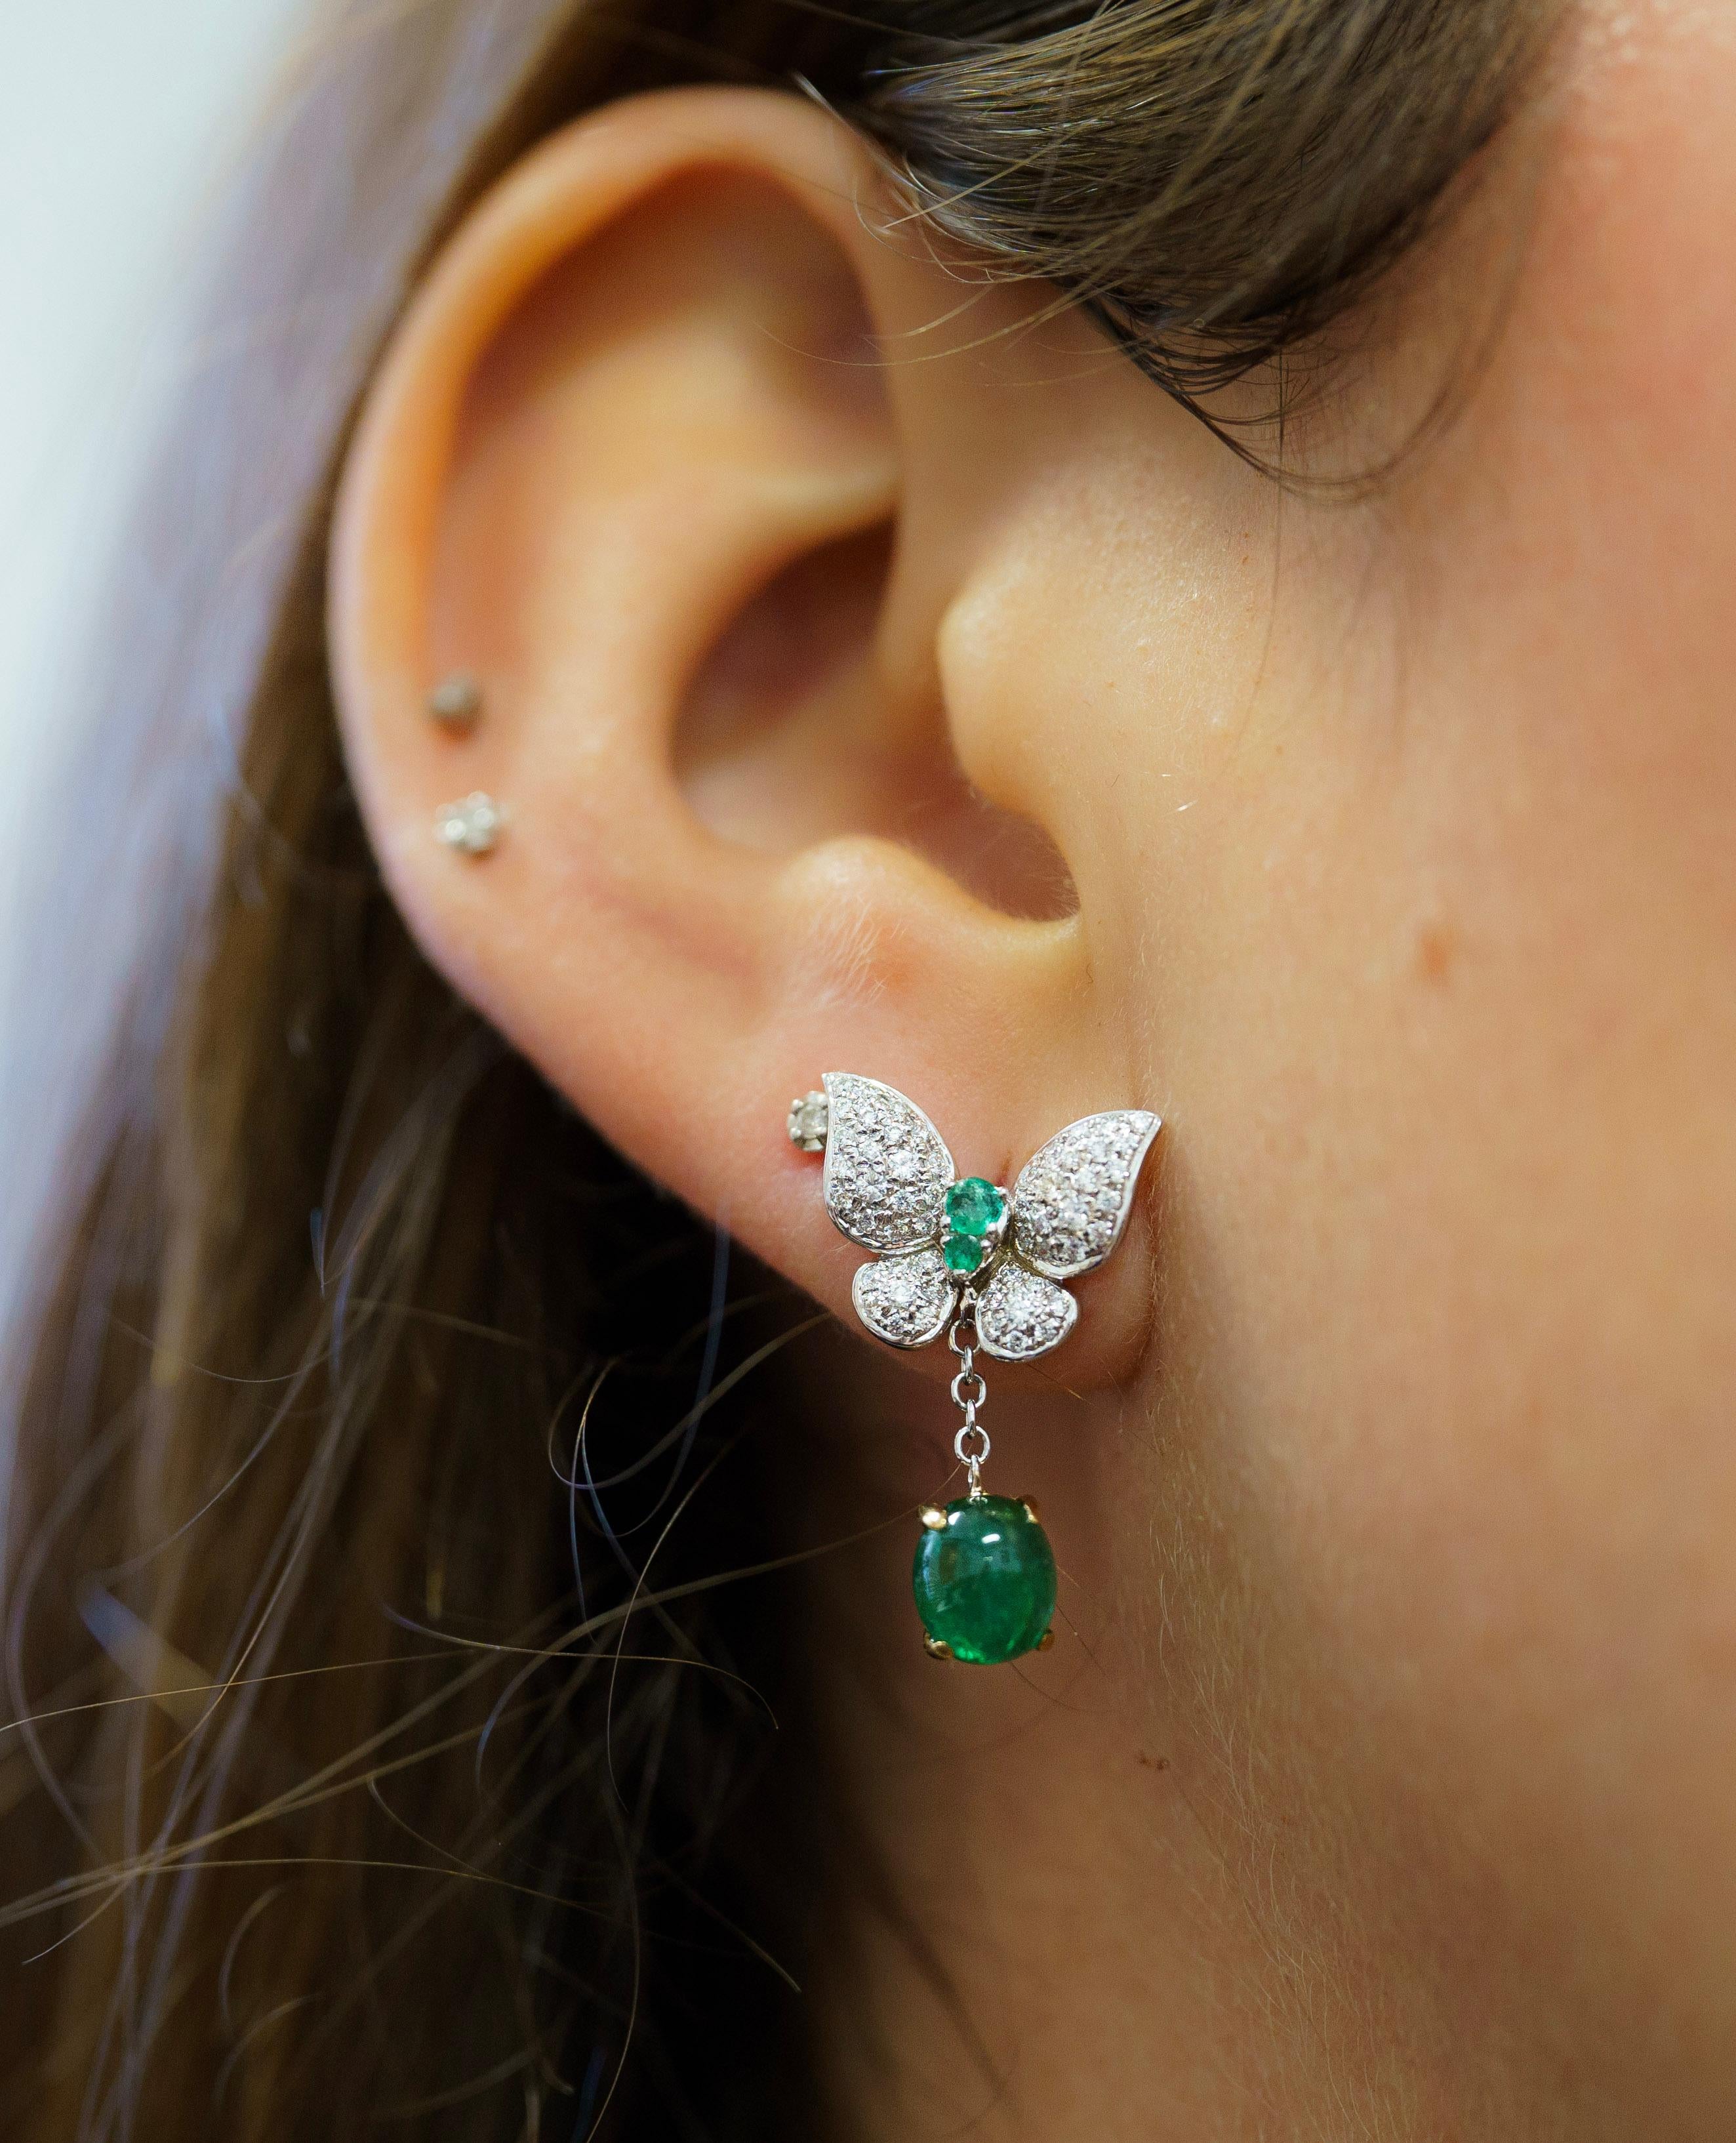 18K solid gold mounts a breathtaking pair of emerald and diamond drop earrings. Featuring two cabochon cut natural emeralds as drops and 0.50 carats in round cut white diamonds. The diamonds are pave set on a butterfly motif setting. Fixed with